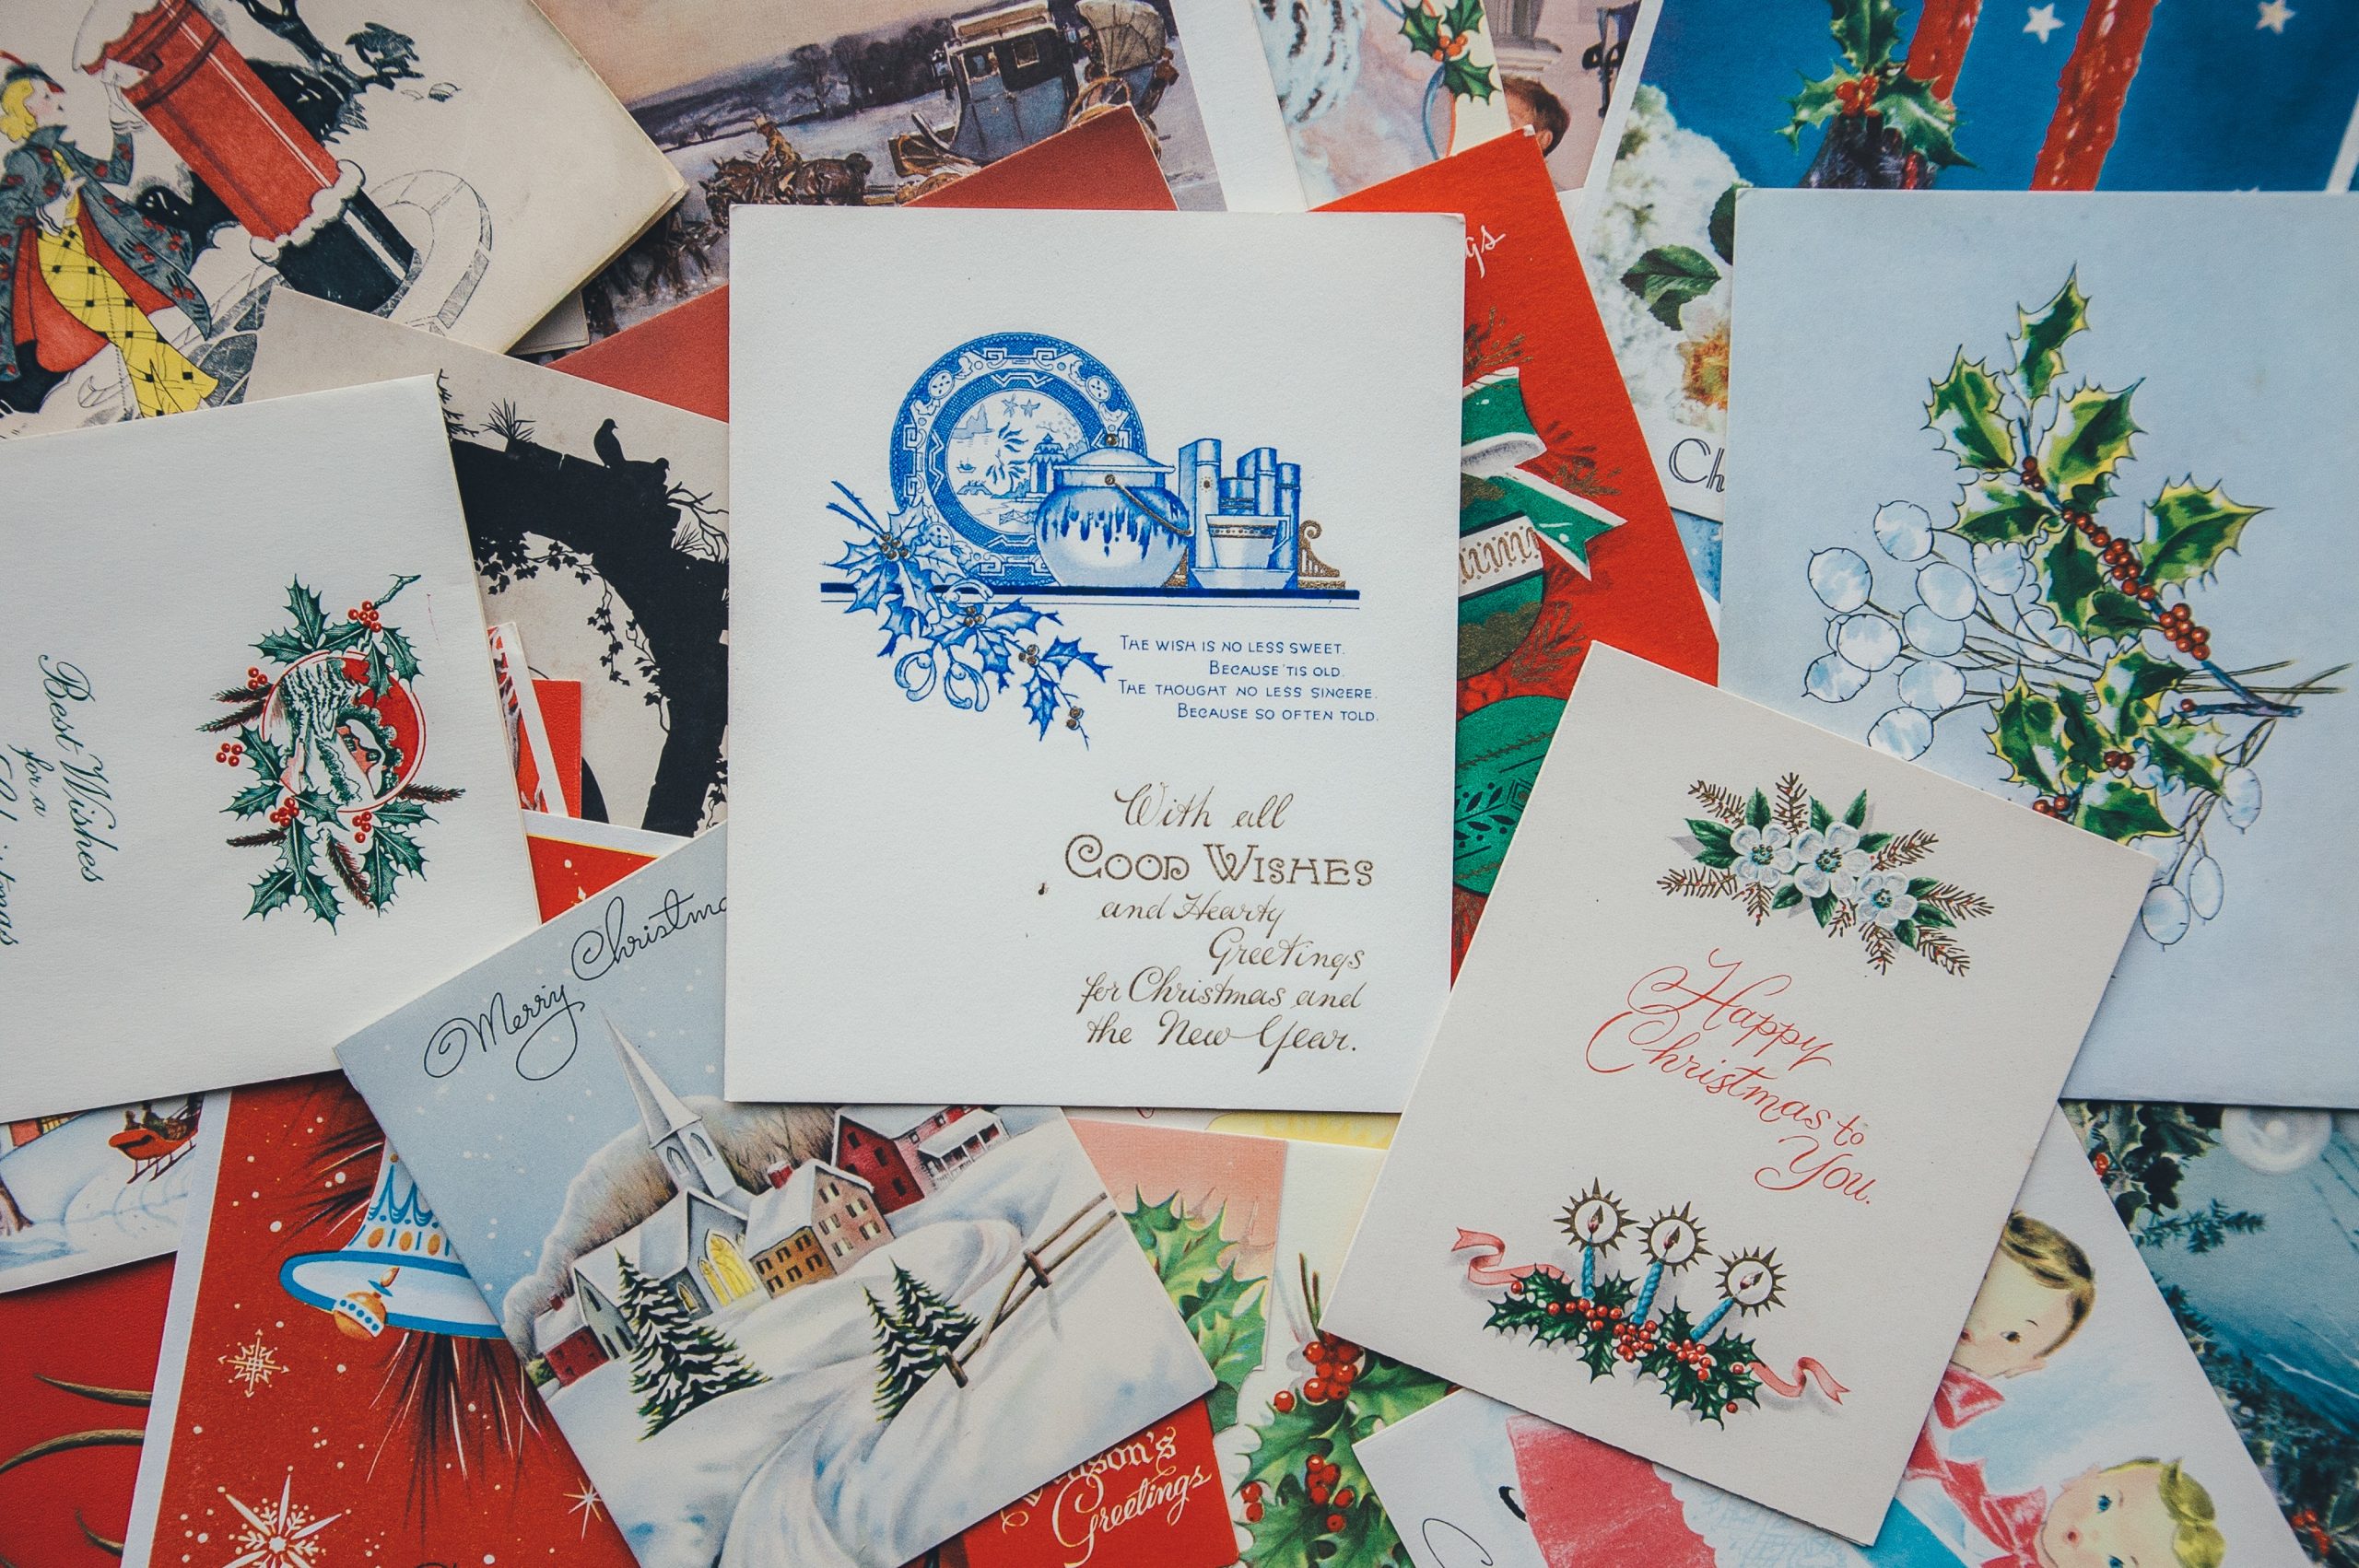 Recycled Holiday Cards Benefit St. Judes Ranch